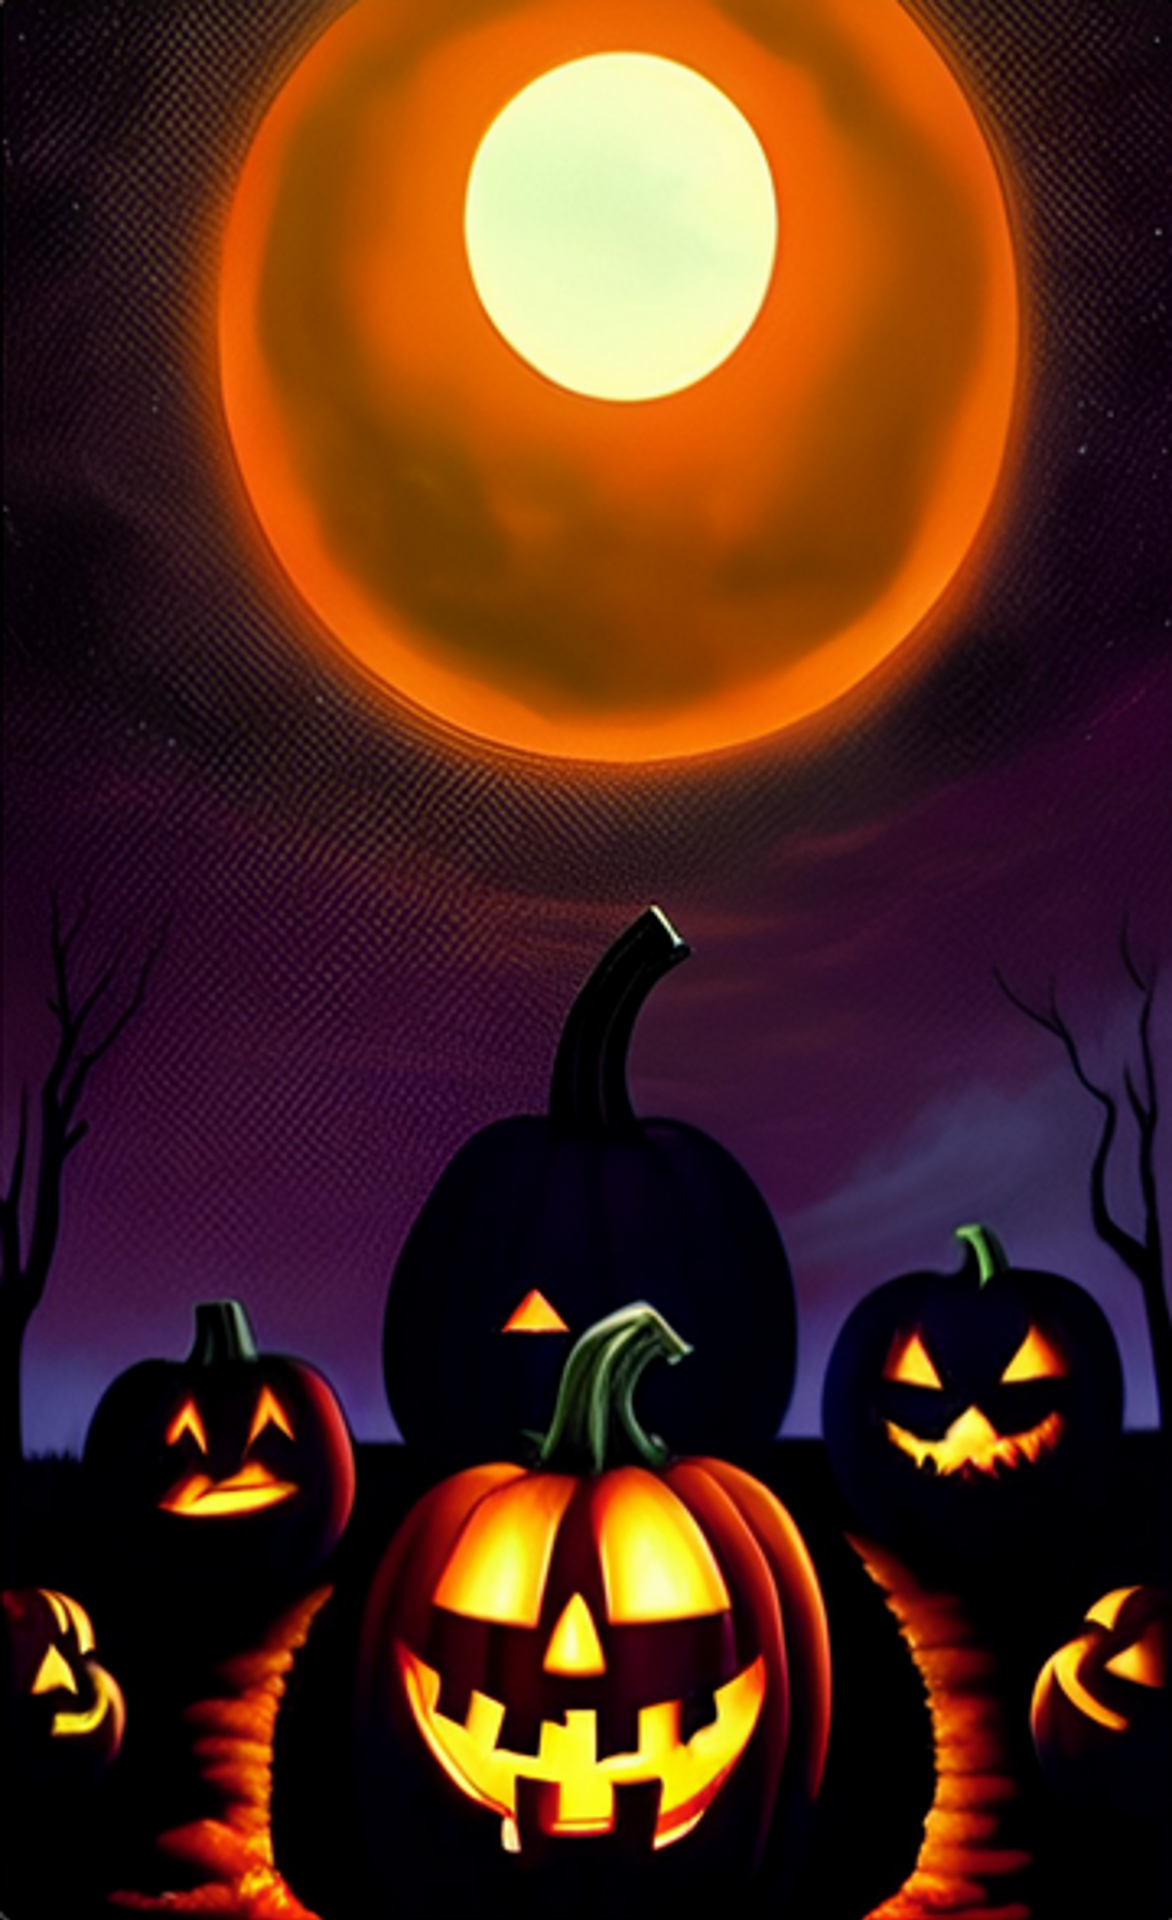 Full Moon Pumpkins Free Stock Photo - Public Domain Pictures